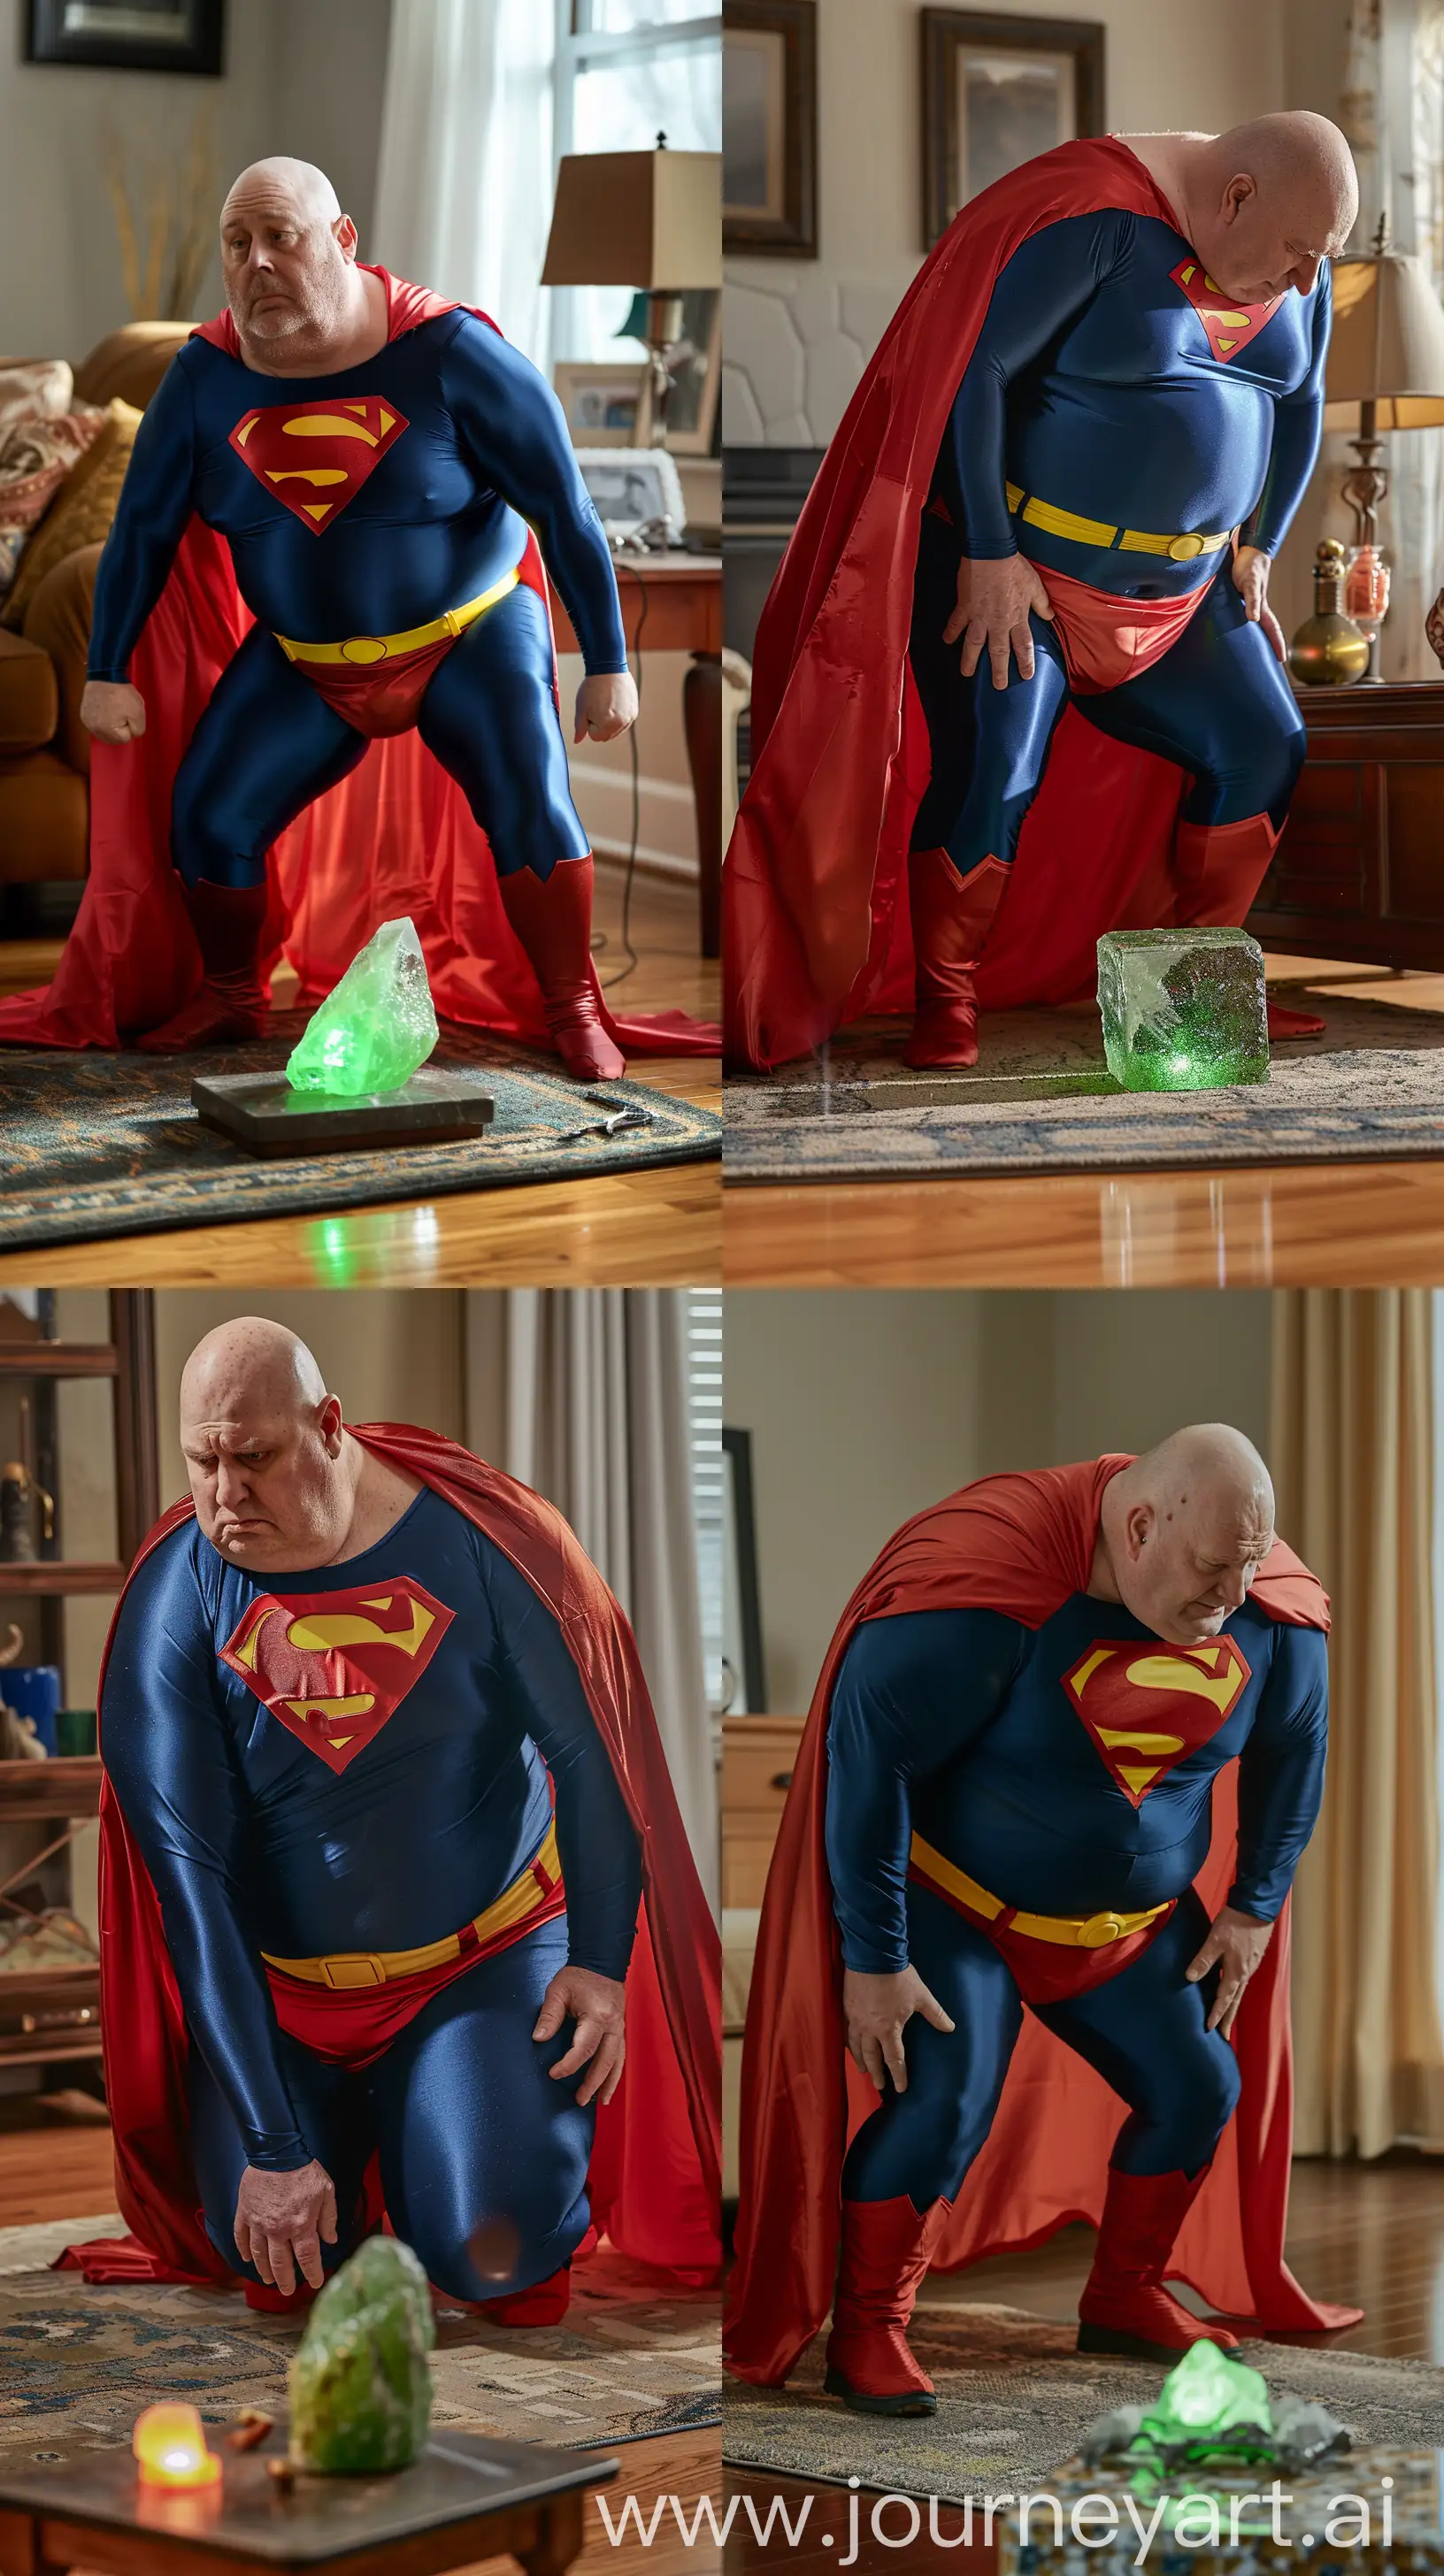 Front close-up photo of a fat man aged 60 wearing silk navy blue complete superman tight uniform with a large red cape, red trunks, yellow belt, red boots. Falling on his knees on the ground in front of a small green glowing rock placed on a table. Inside a living room. Bald. Clean Shaven. Natural light. --ar 9:16